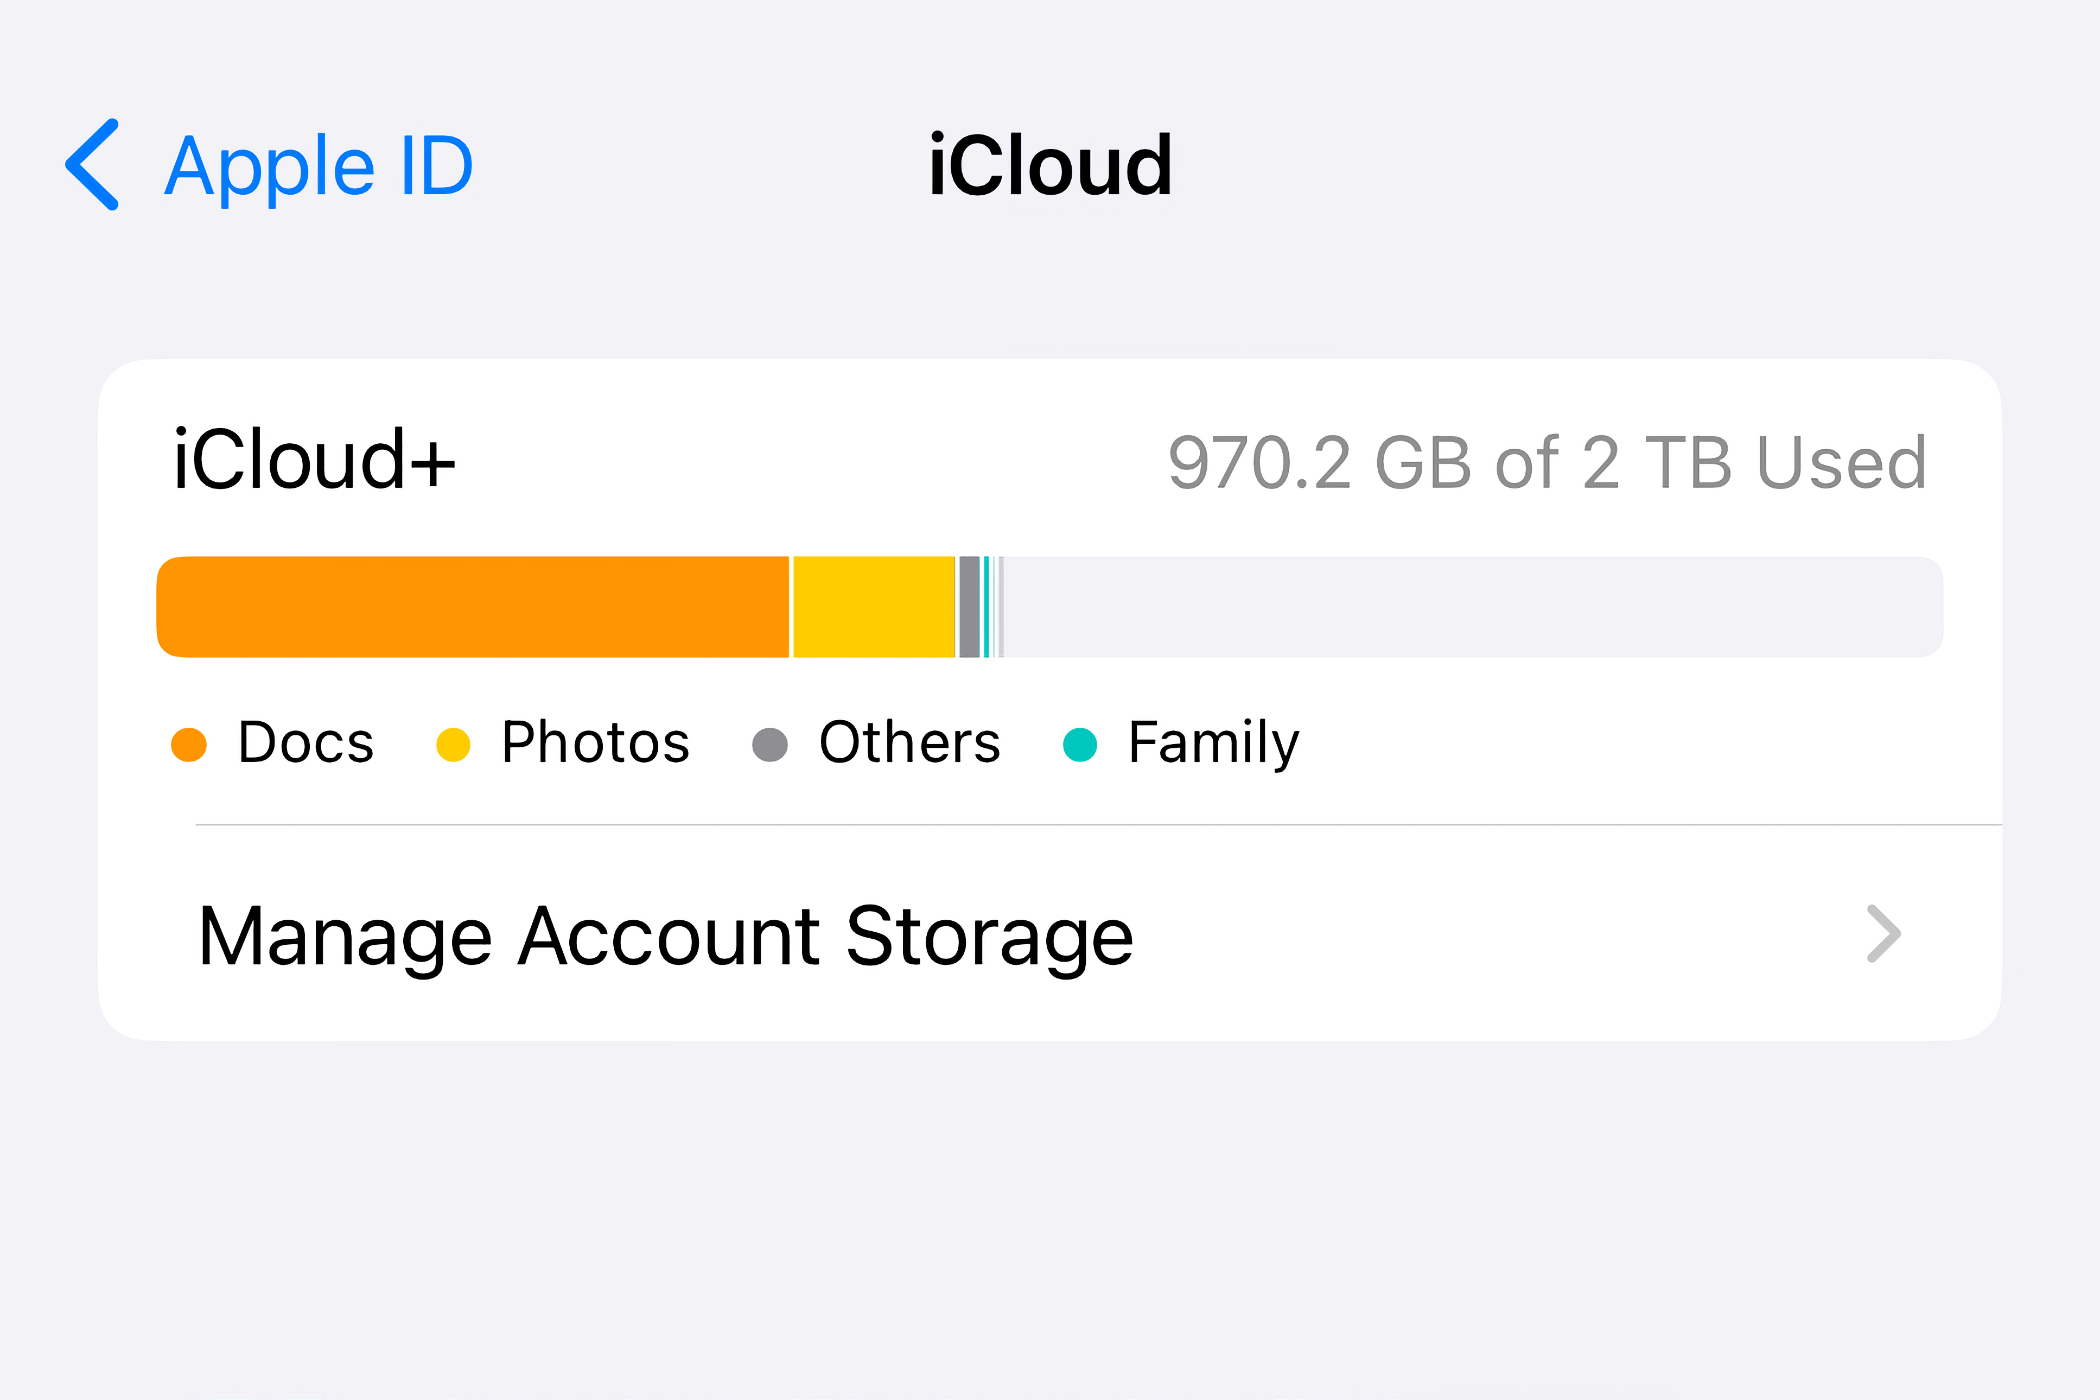 A close-up of the storage bar chart in the iCloud settings on iPhone.